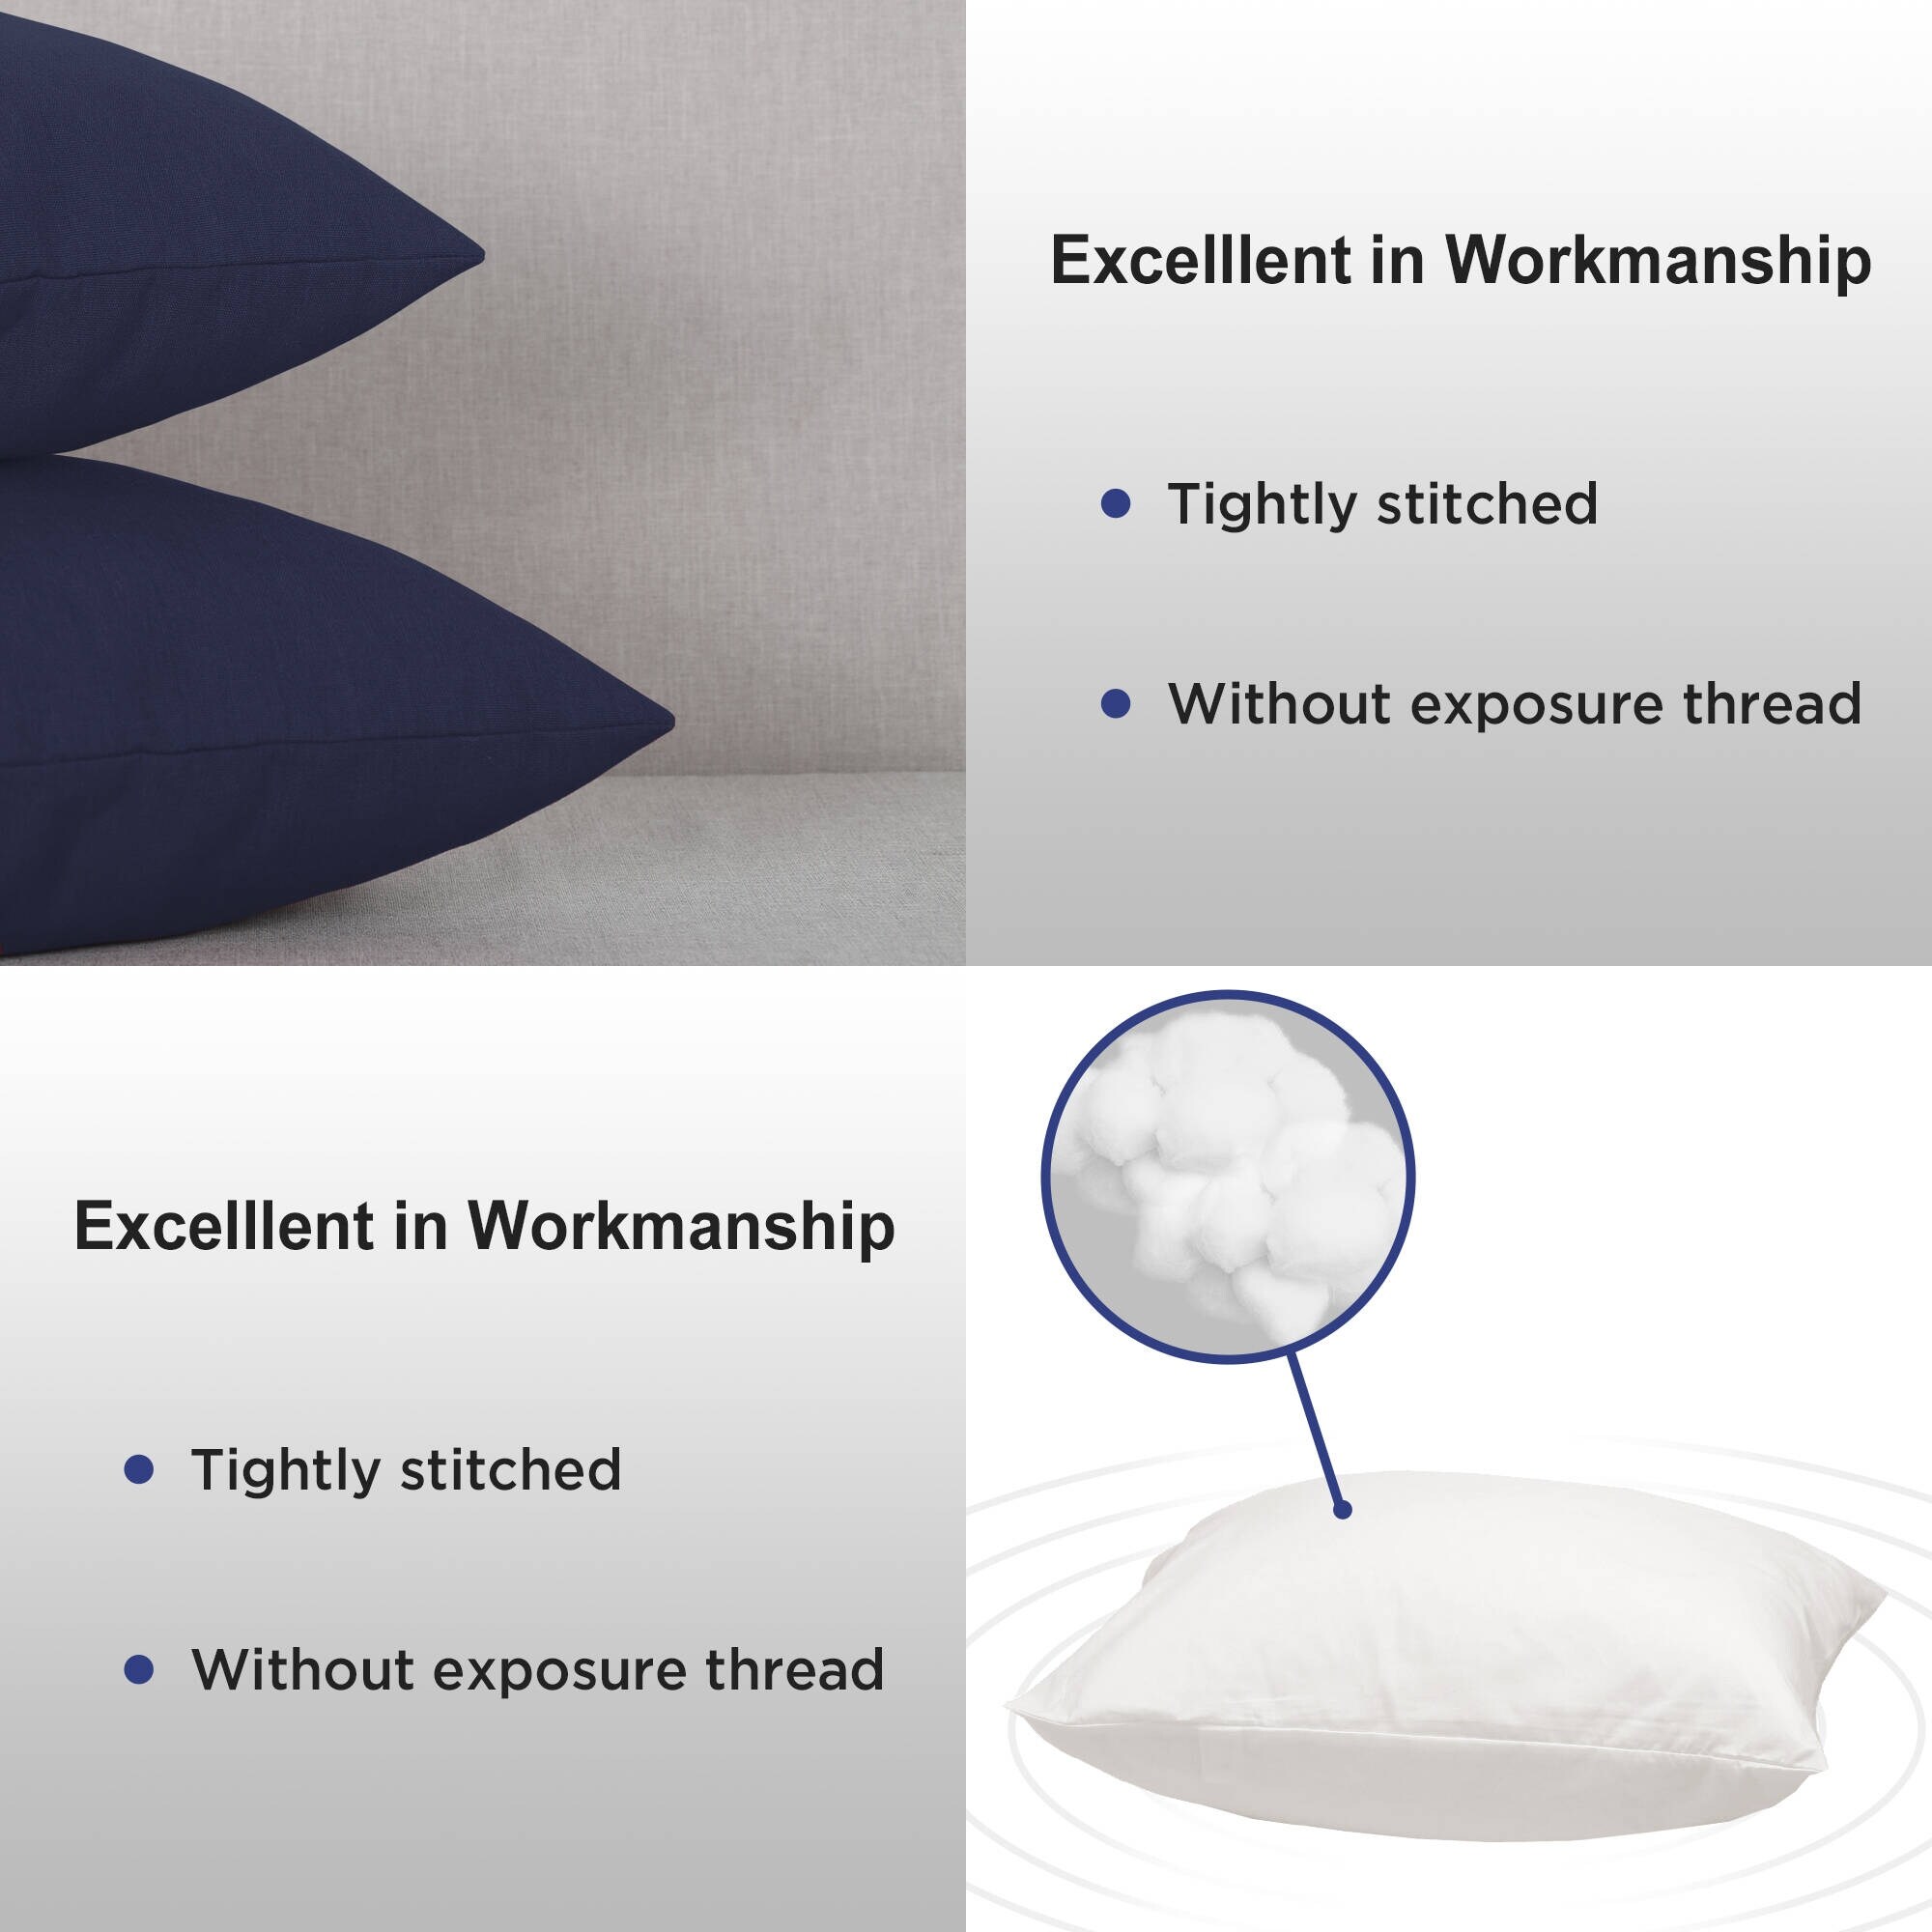 18 x 18 indoor/outdoor Pillow With Inserts(Pack Of 2 ) - Bed Bath &  Beyond - 36939638